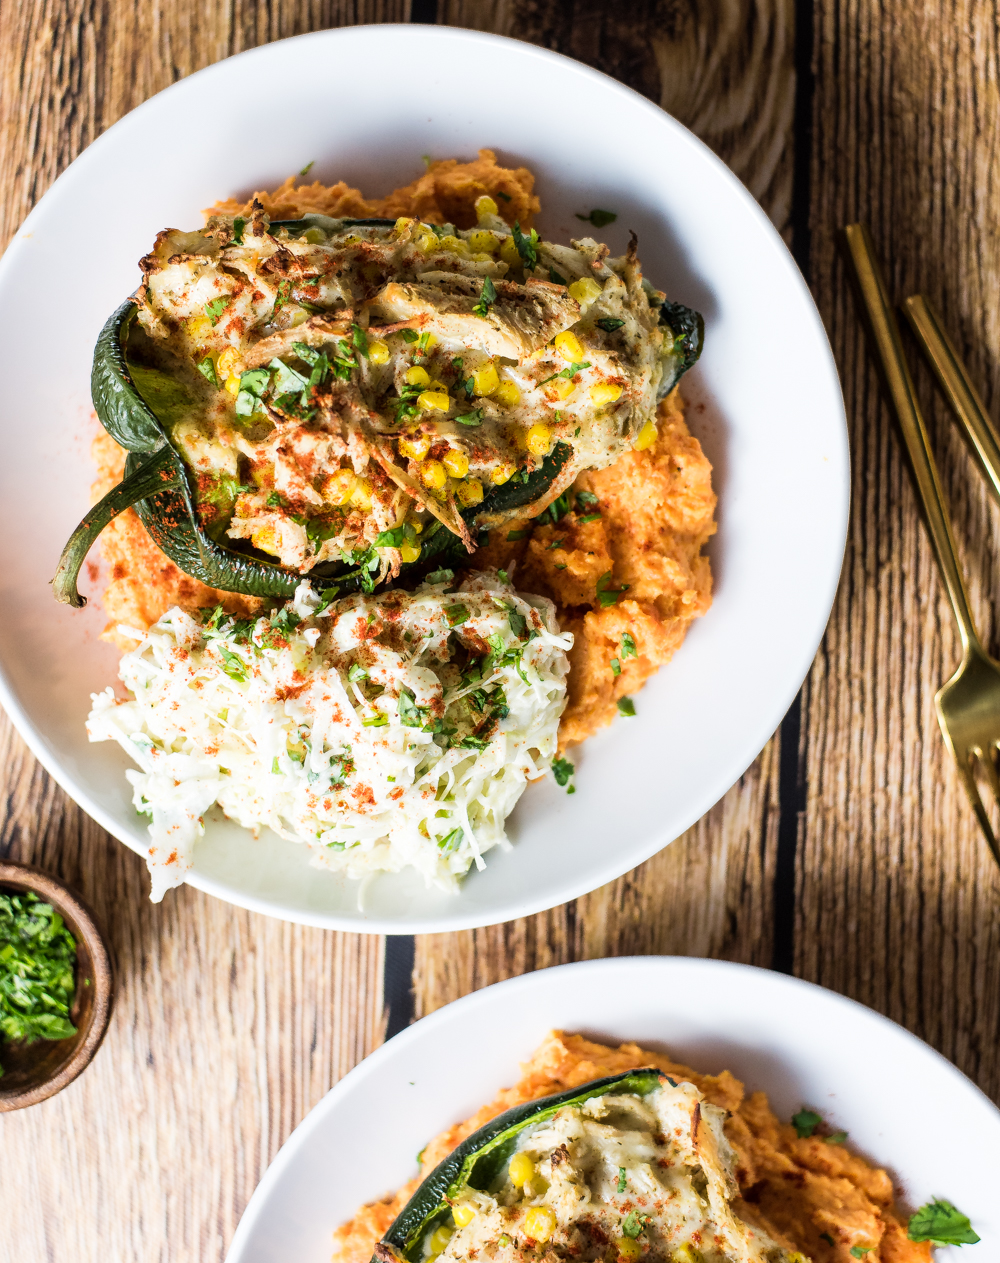 Stuffed poblano and sweet potato mash bowls are the perfect weeknight healthy recipe. It's packed full of flavor that will have you wanting more!